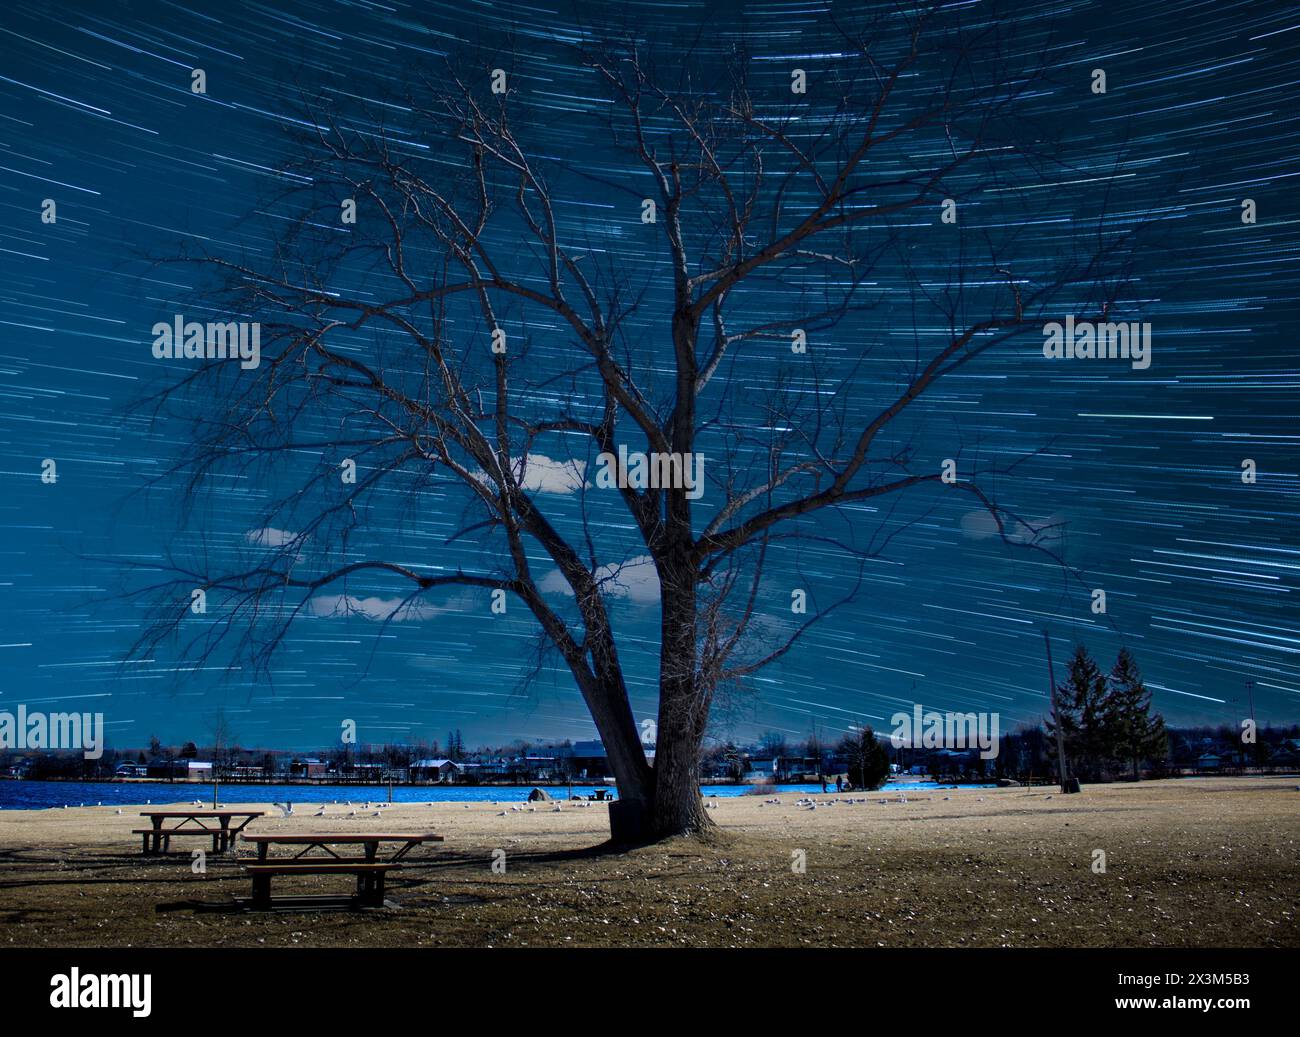 Under the timeless canopy of a riverside tree, the celestial ballet of star trails unfolds in the night sky, painting a picture of serene beauty. Stock Photo